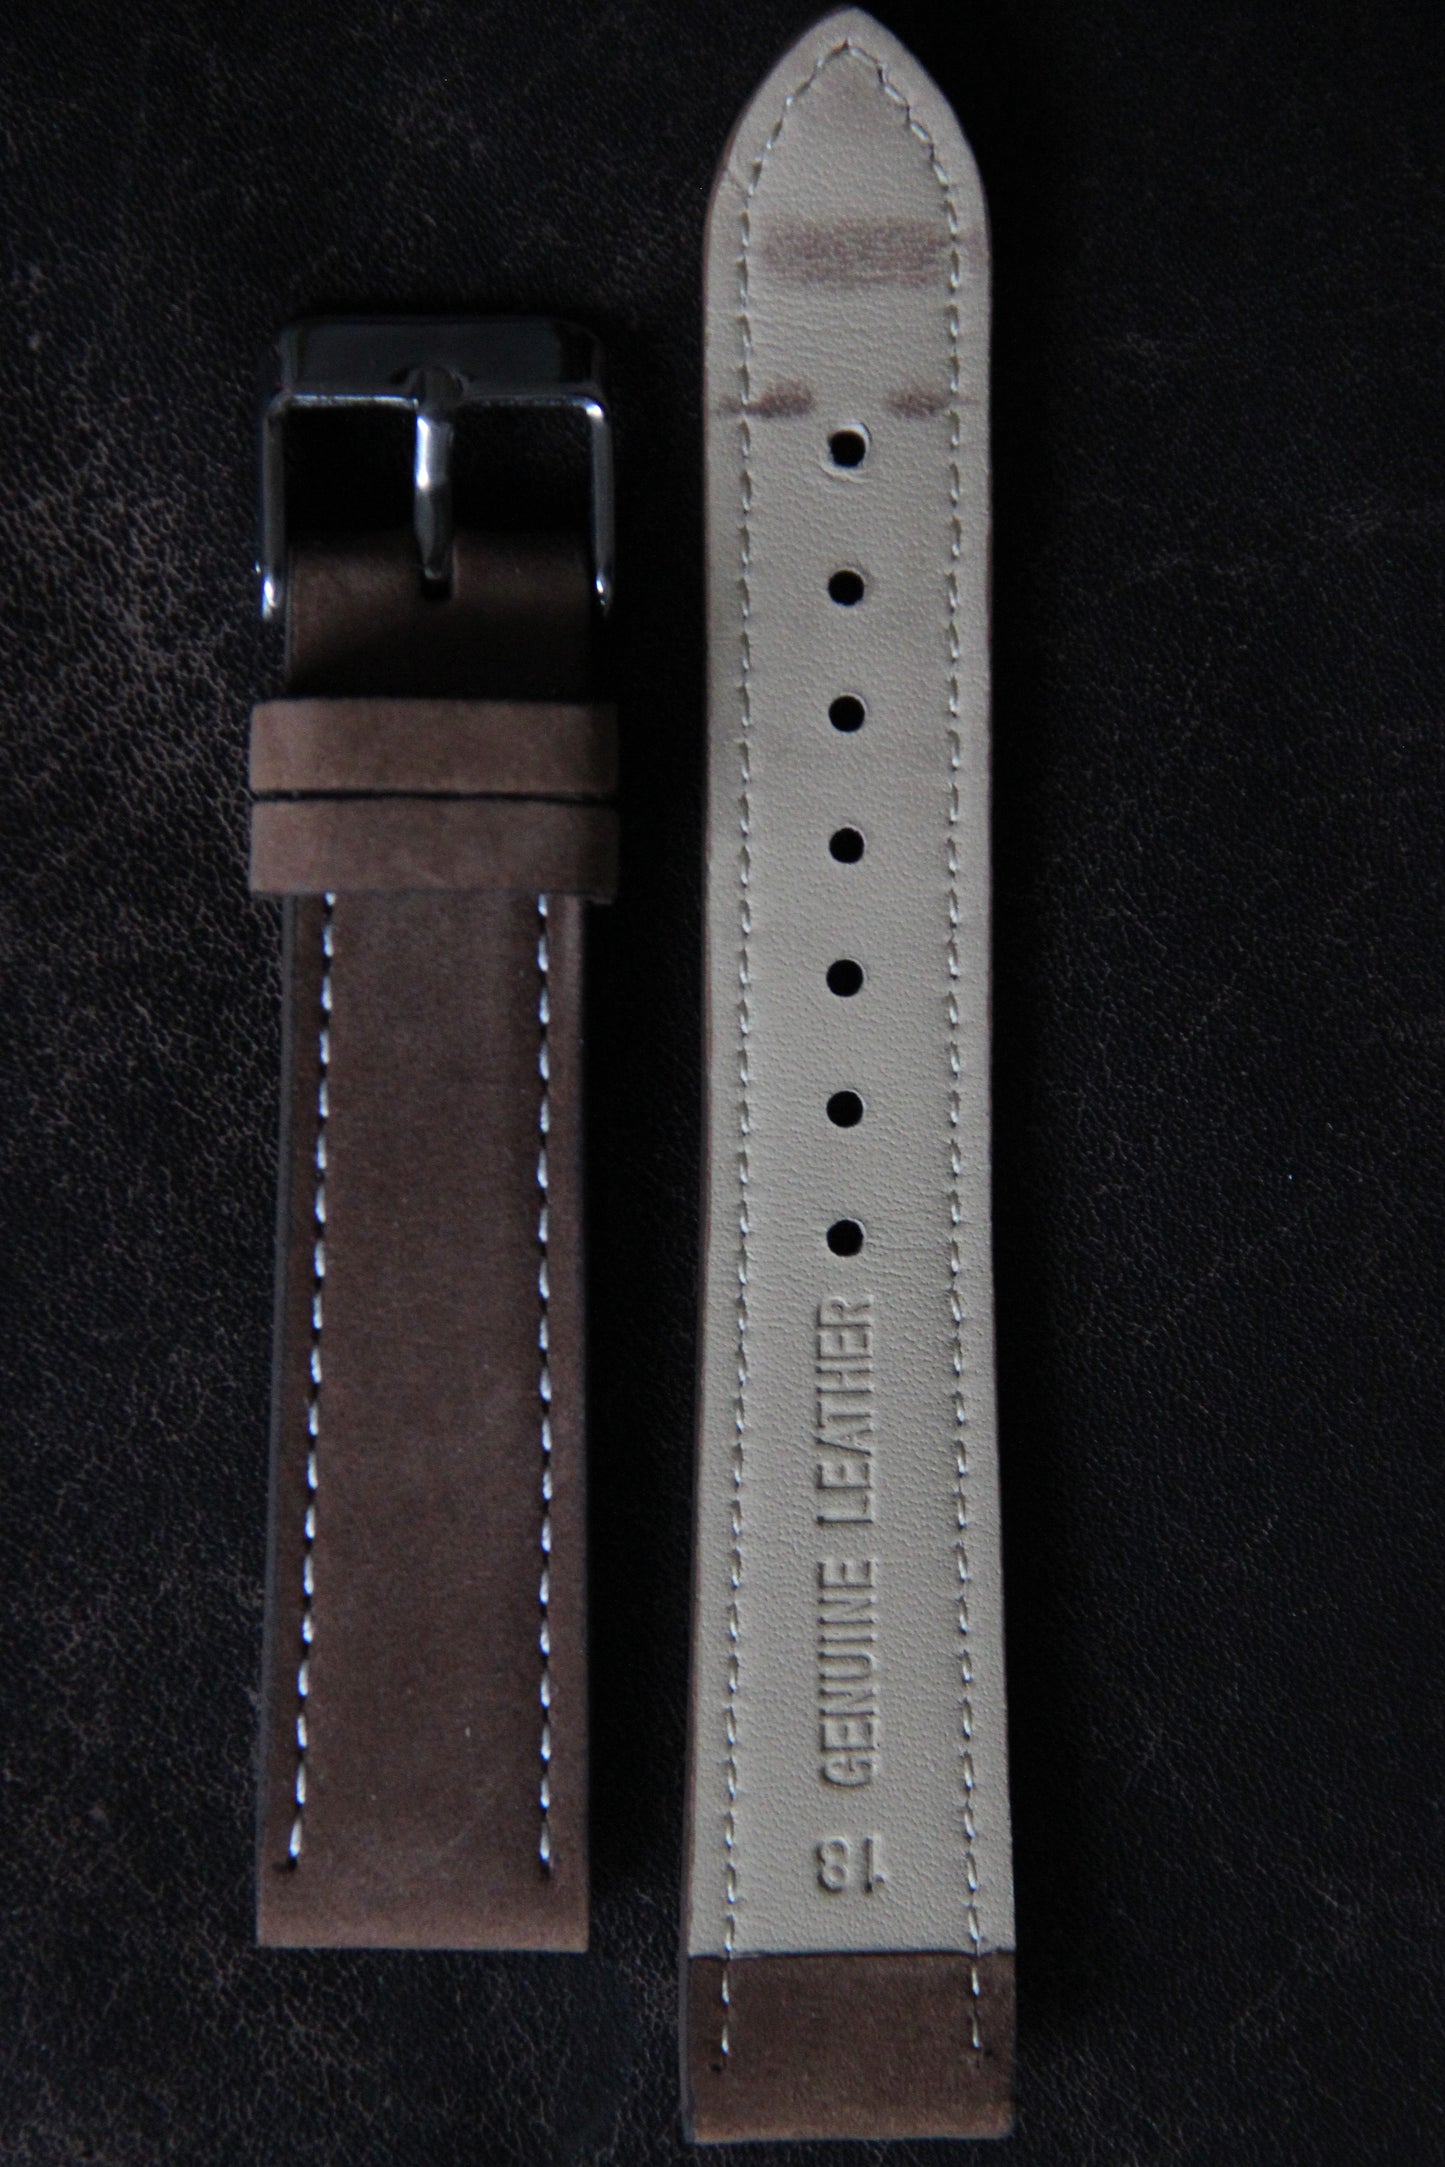 Velvet look leather watch straps, brown - Contrasting stitching